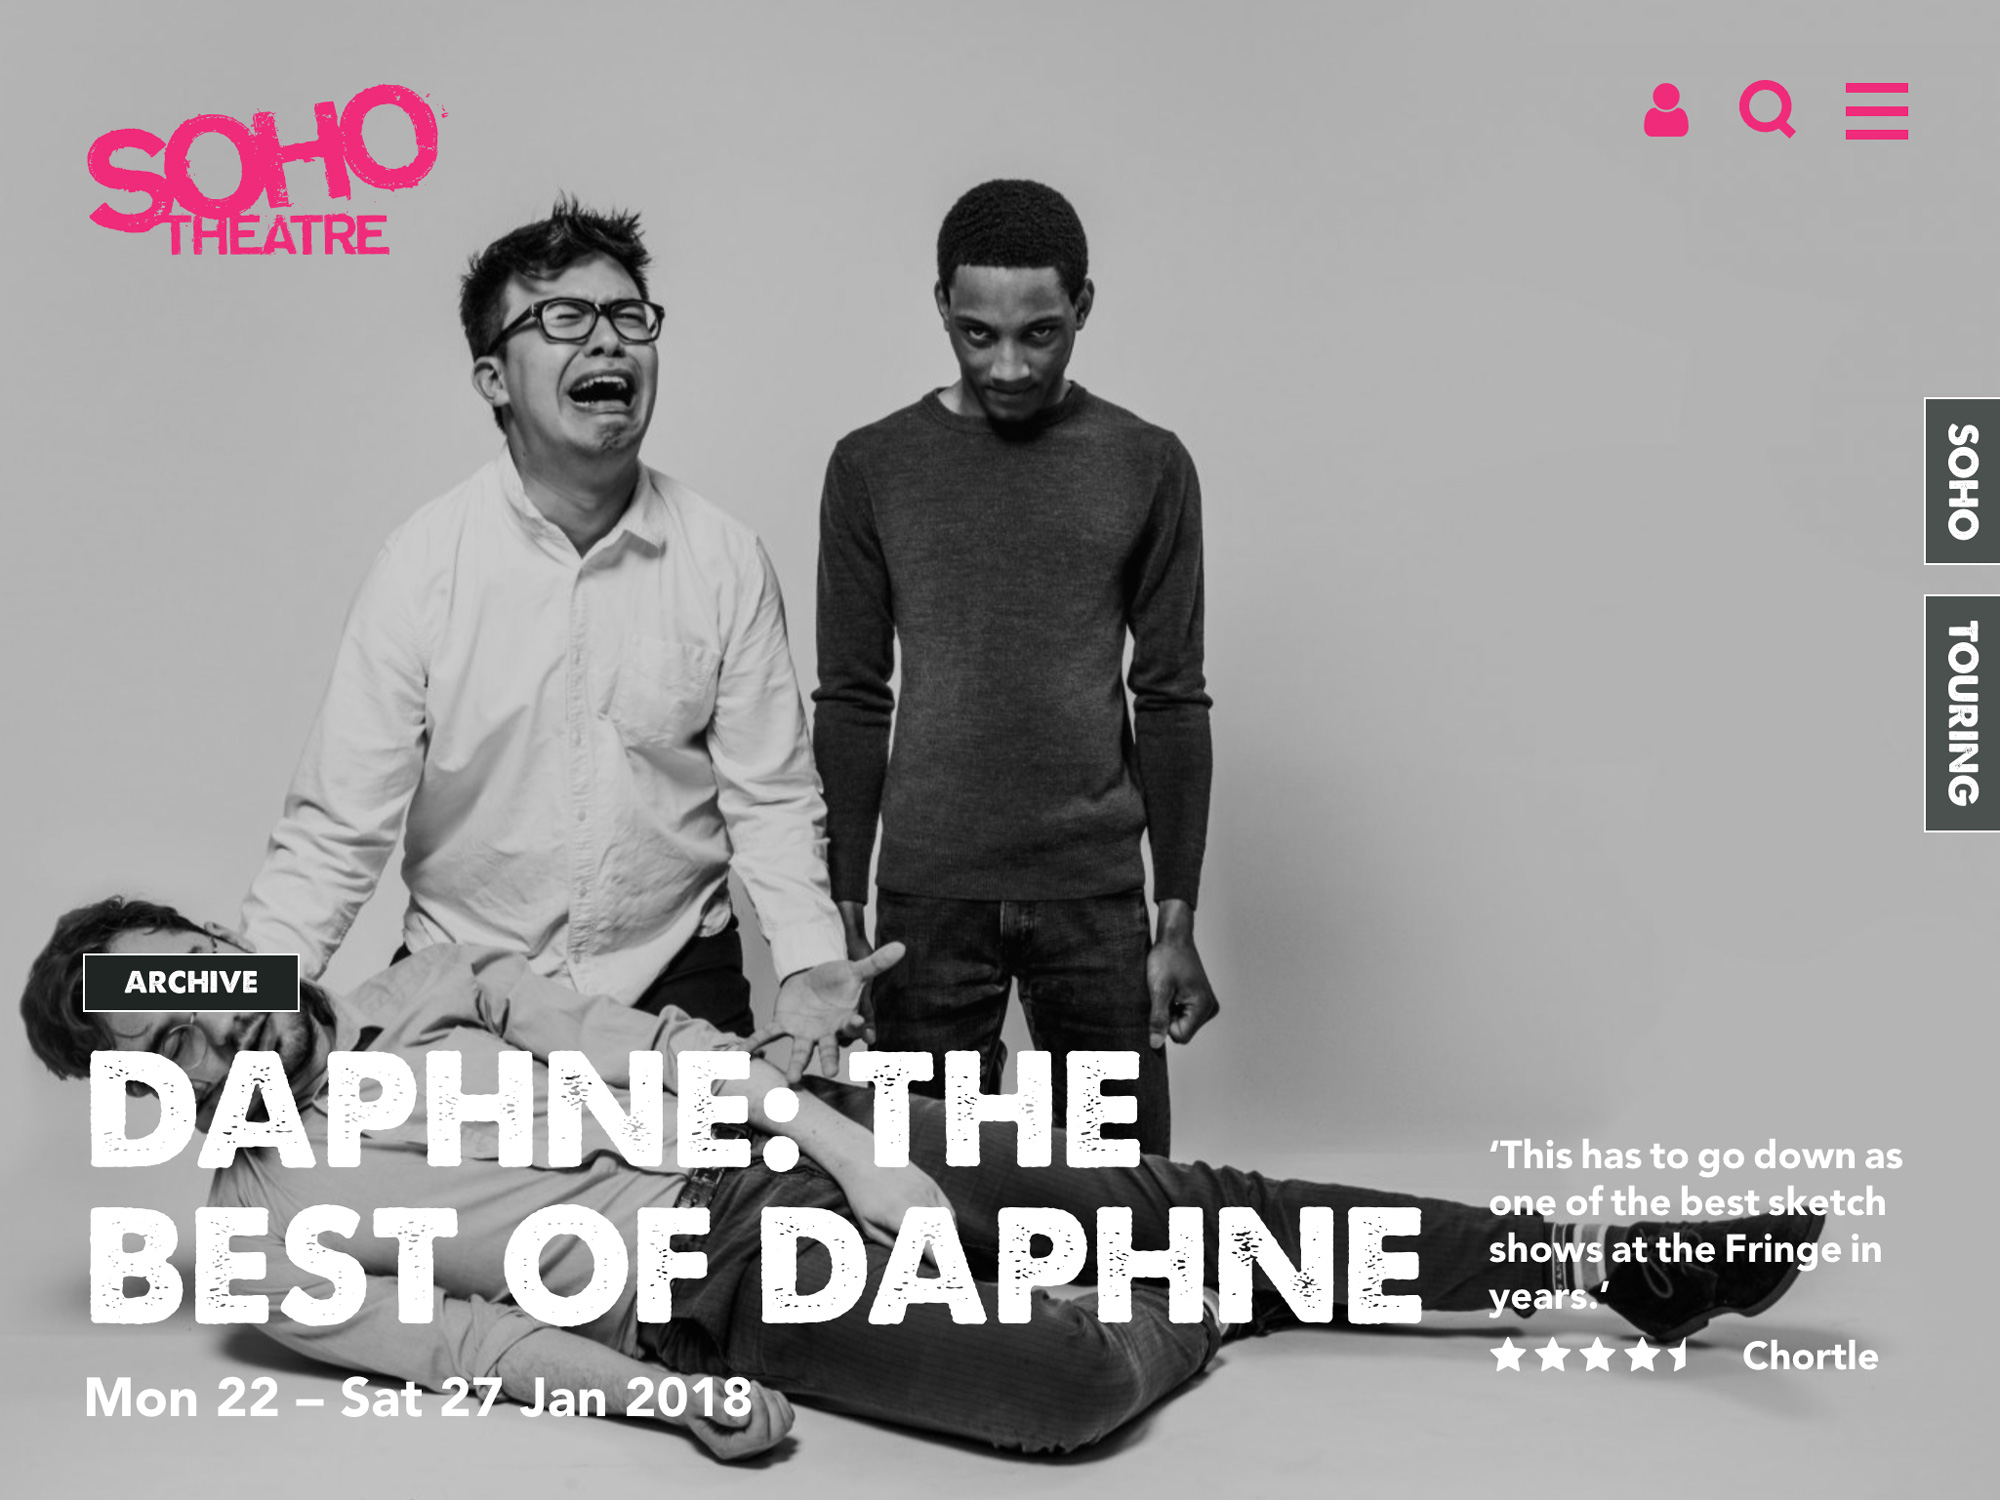 Website page of Soho Theatre, showing the event details for Daphne: The Best of Daphne, with the black and white image of three men in the backgound